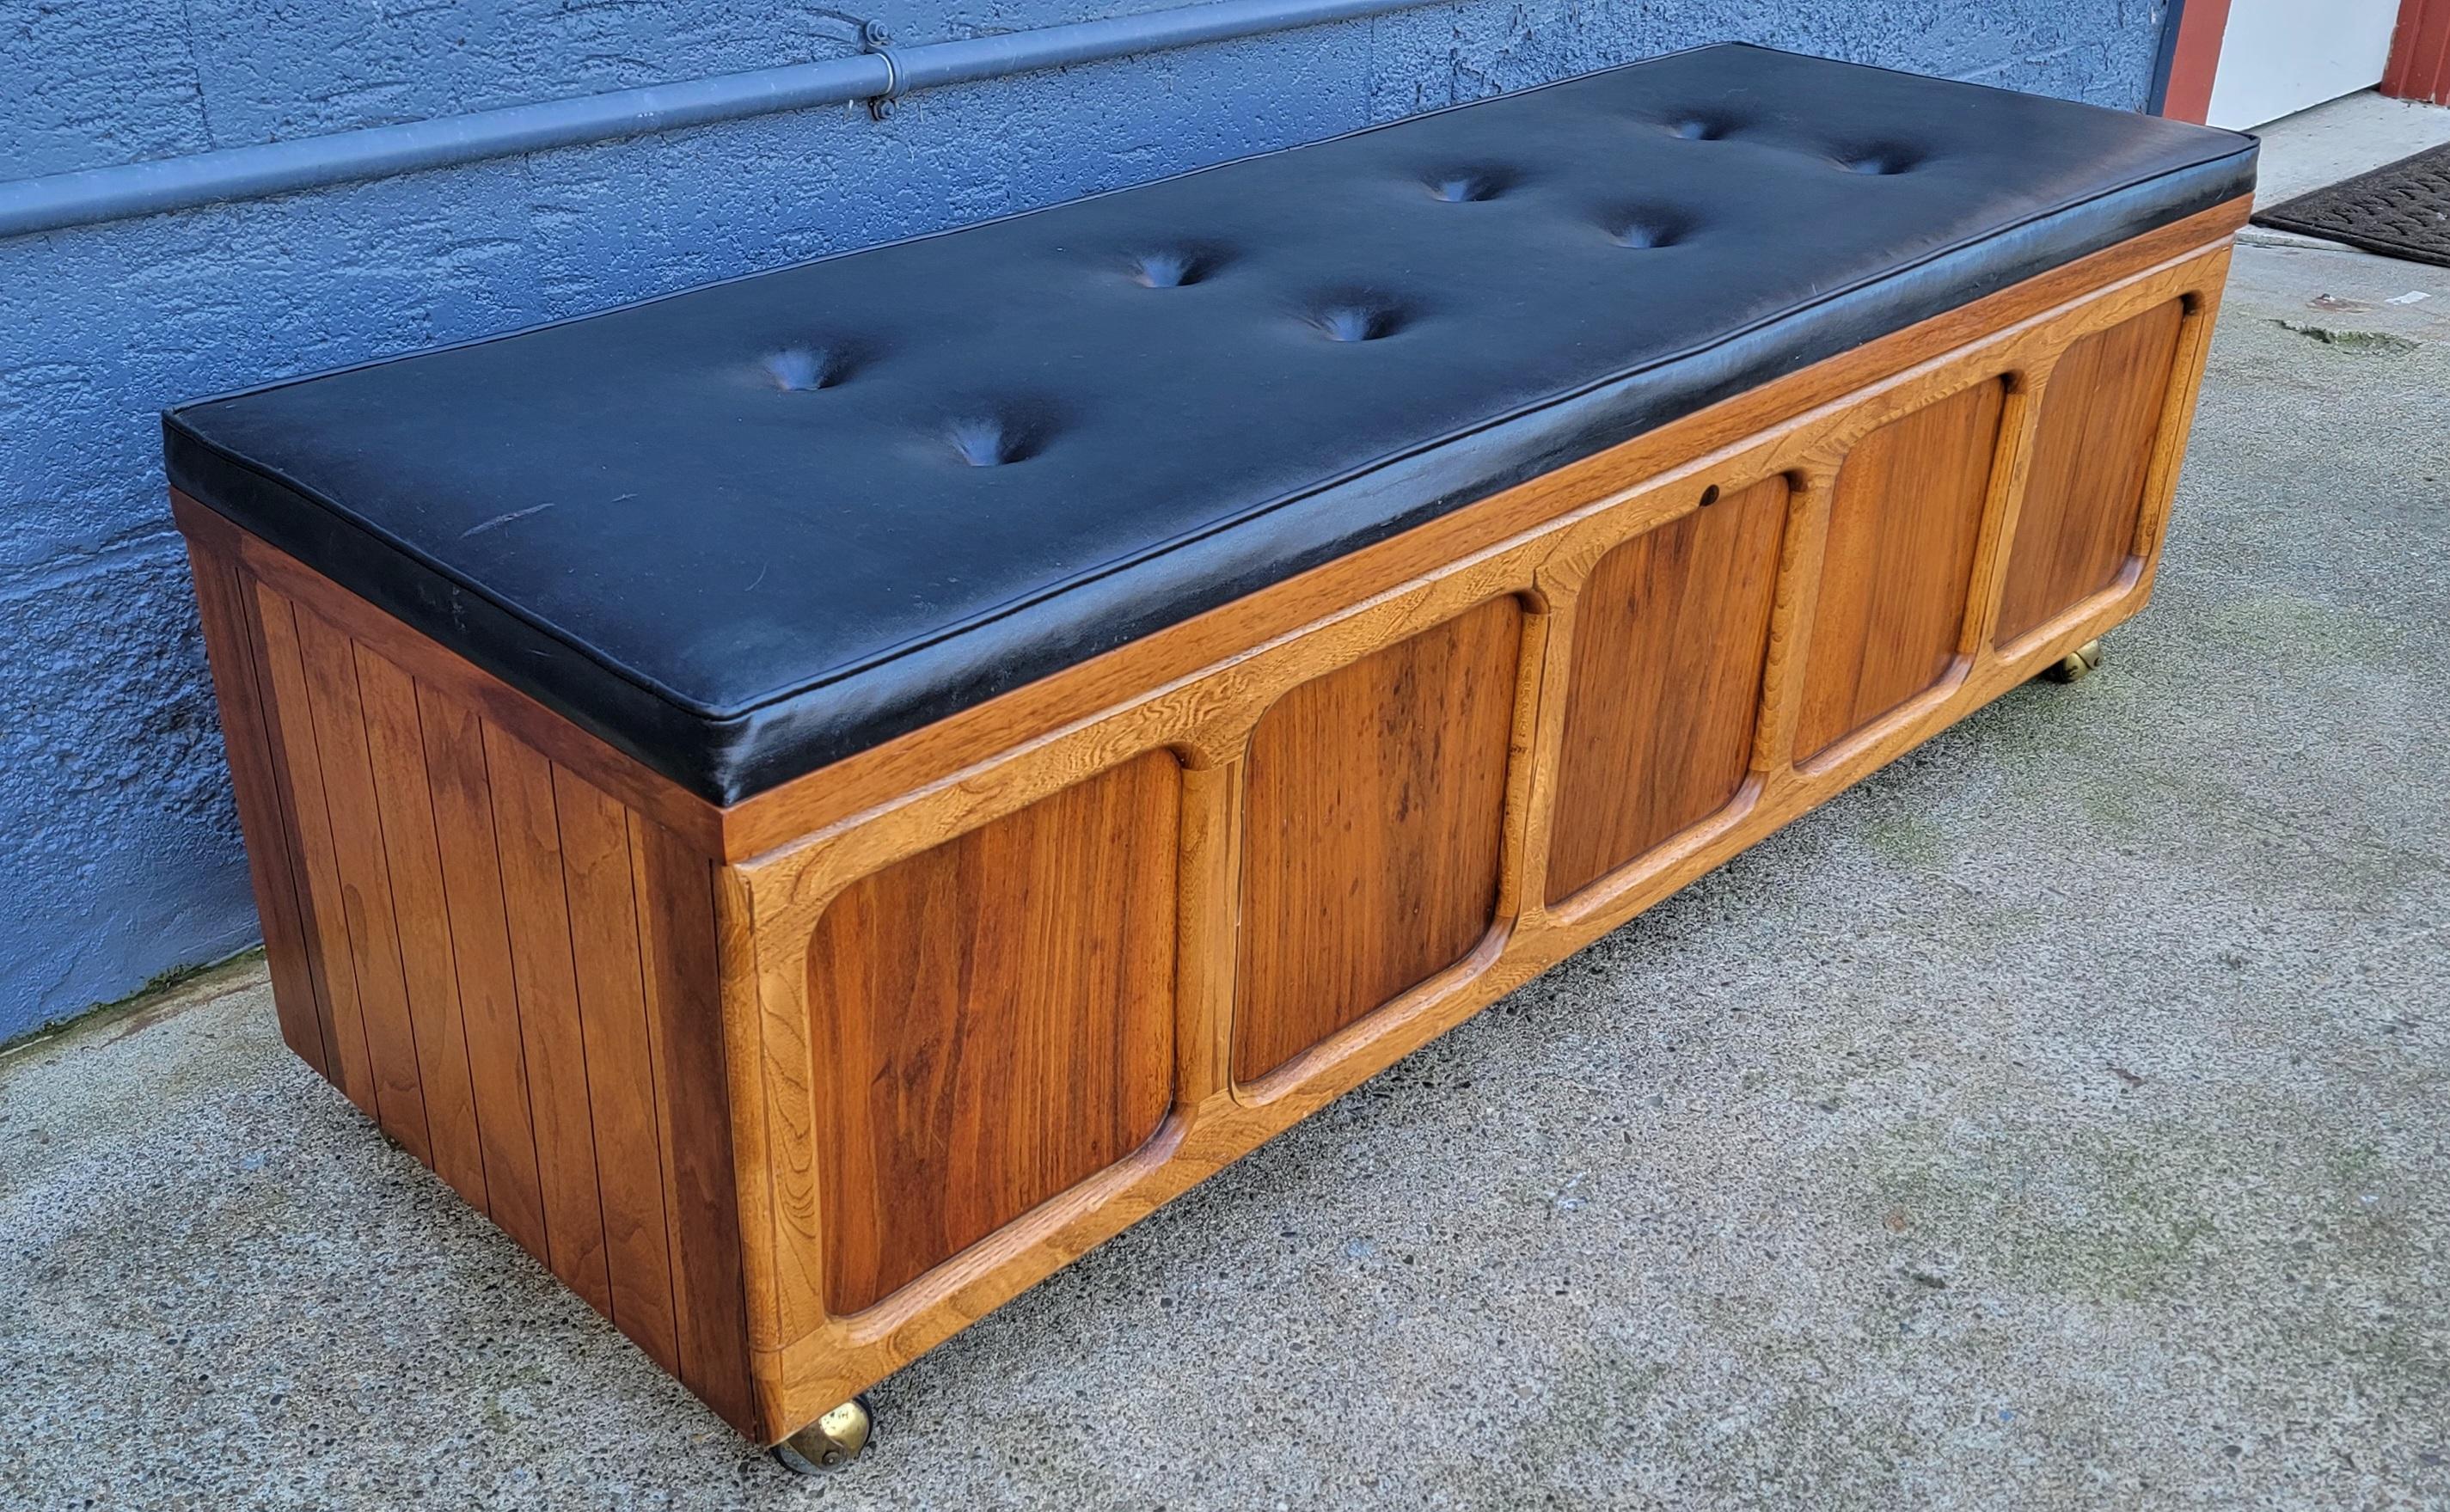 Classic Mid-Century Modern cedar hope chest or trunk with the original tufted upholstered top by Lane Furniture. Circa. 1960s. Original vintage condition is very good with the exception of a small tear in Naugahyde and missing lock. Nice glow to